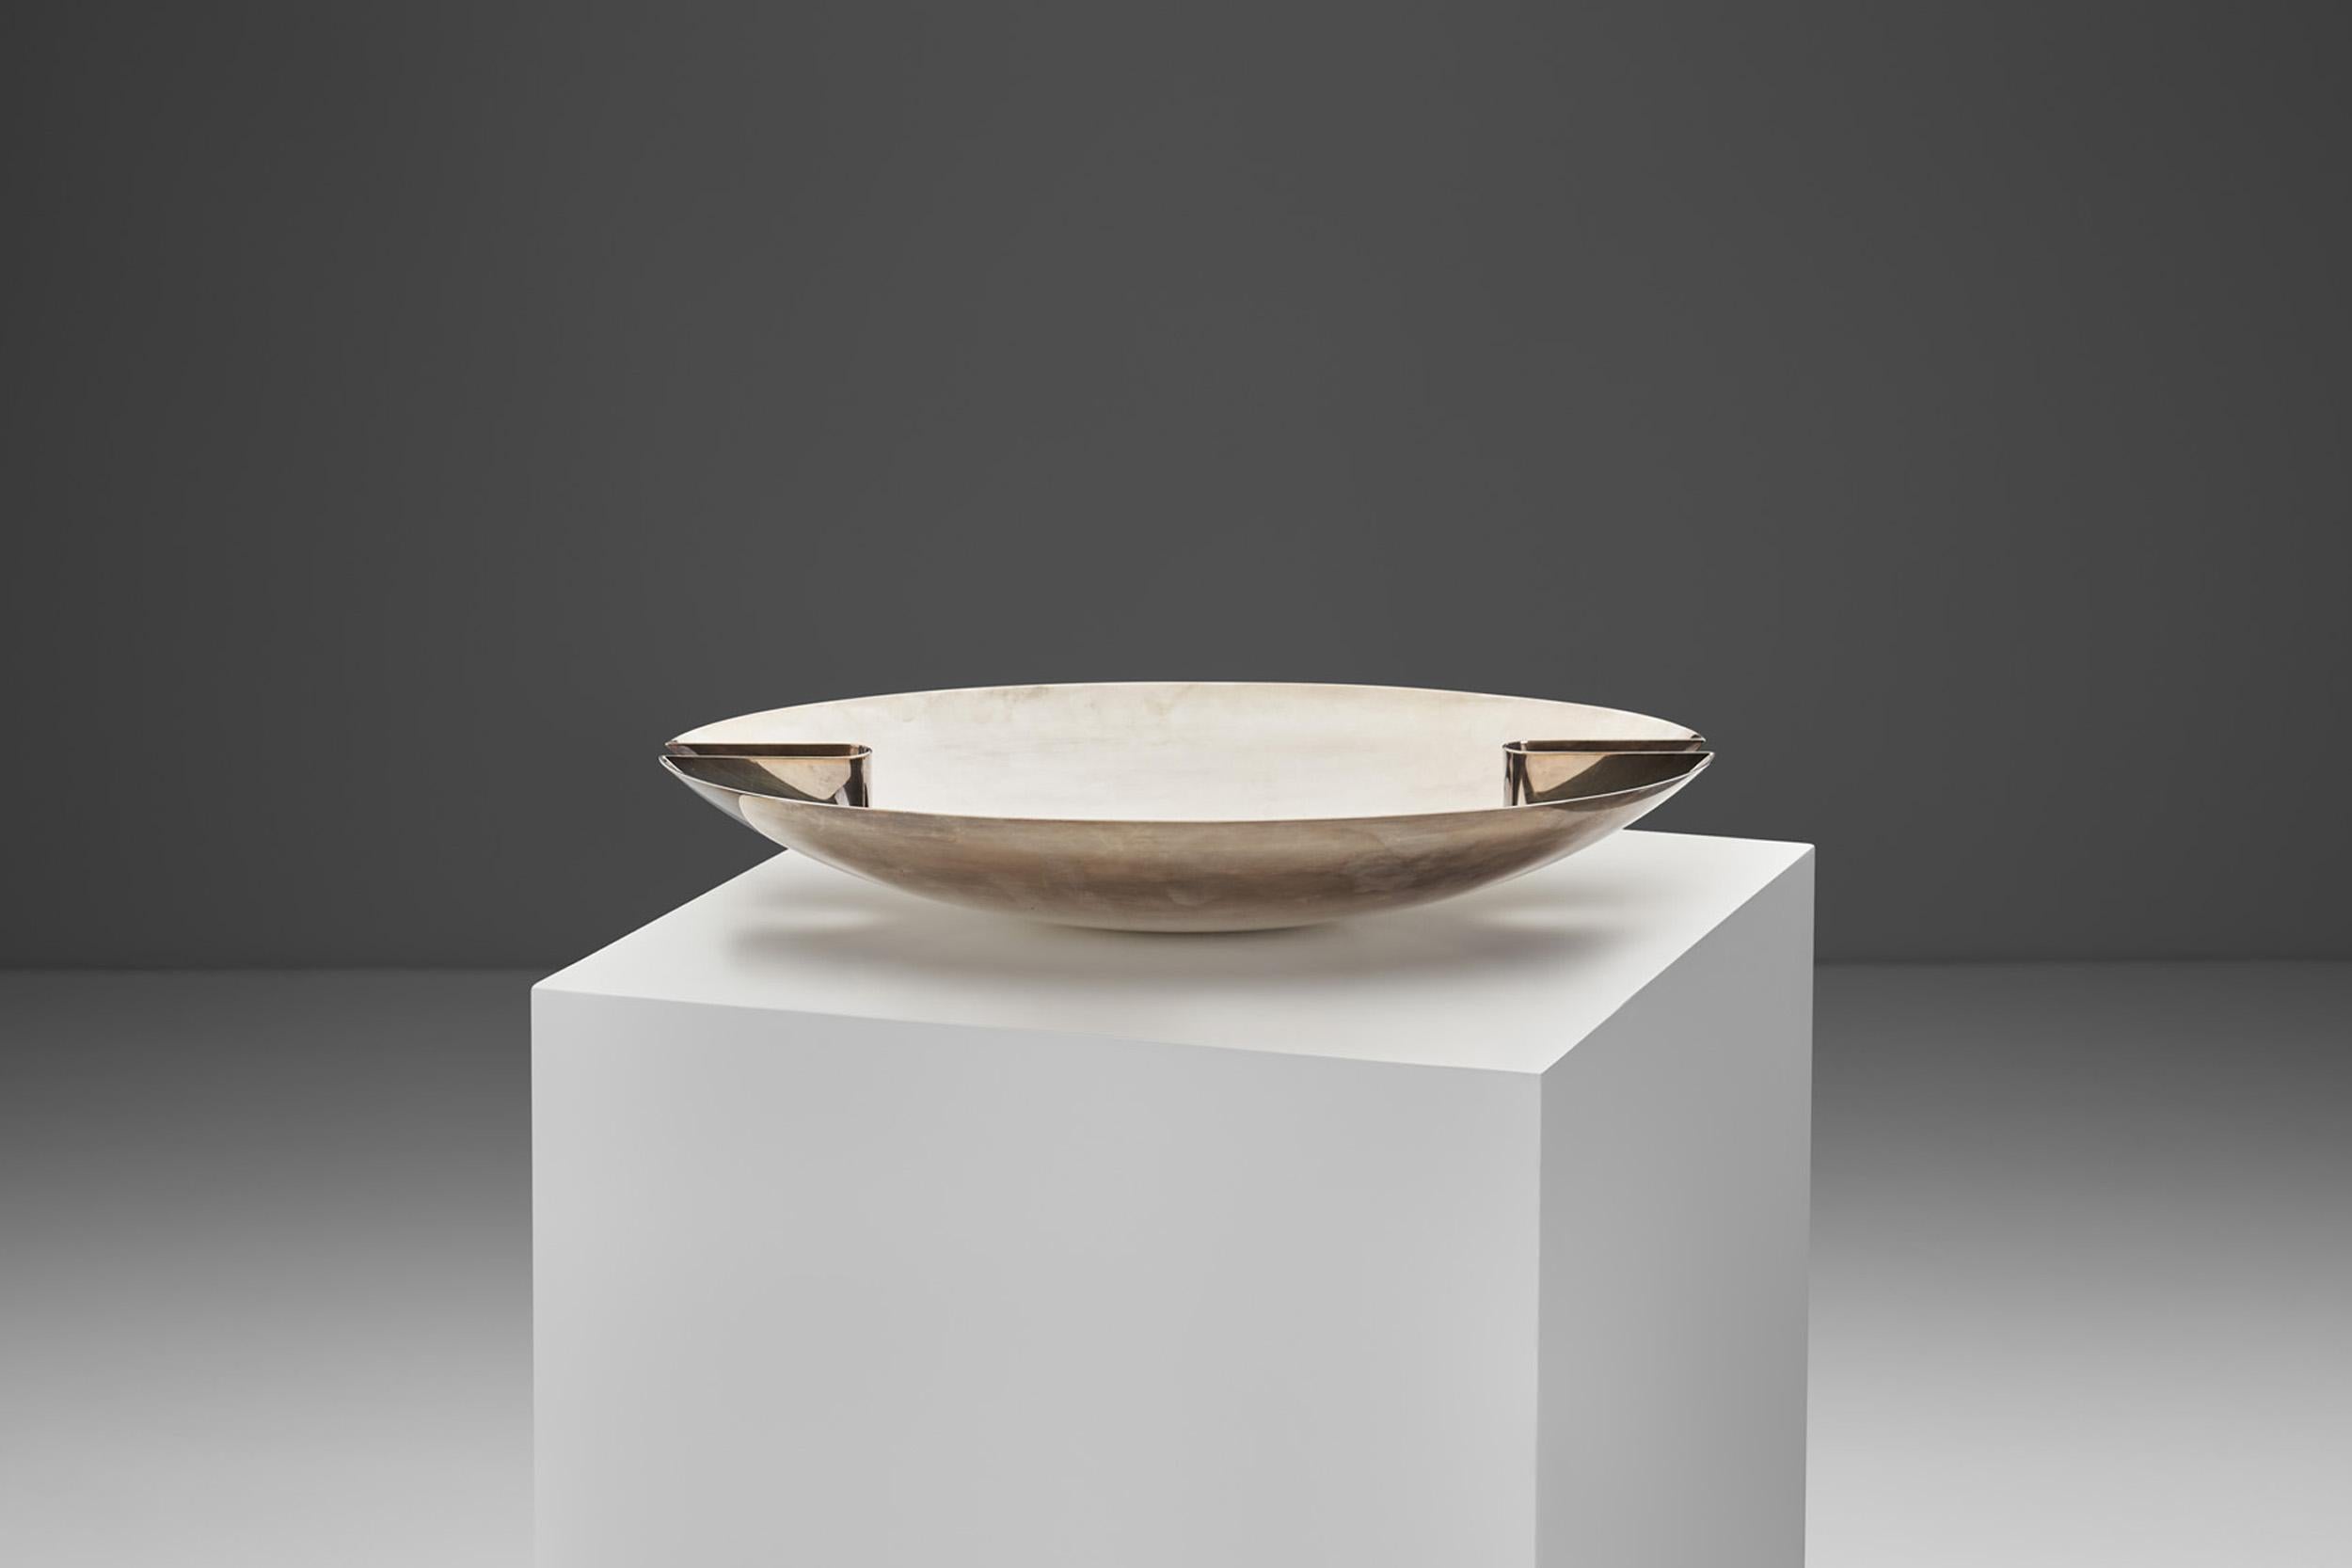 This “Baja” centrepiece bowl was designed in 1976 by the pre-eminent figure of modern Italian silver and metalware design, Lino Sabattini. The designer’s expansive and diverse body of work is marked by its strength and boldness, whether in dynamic